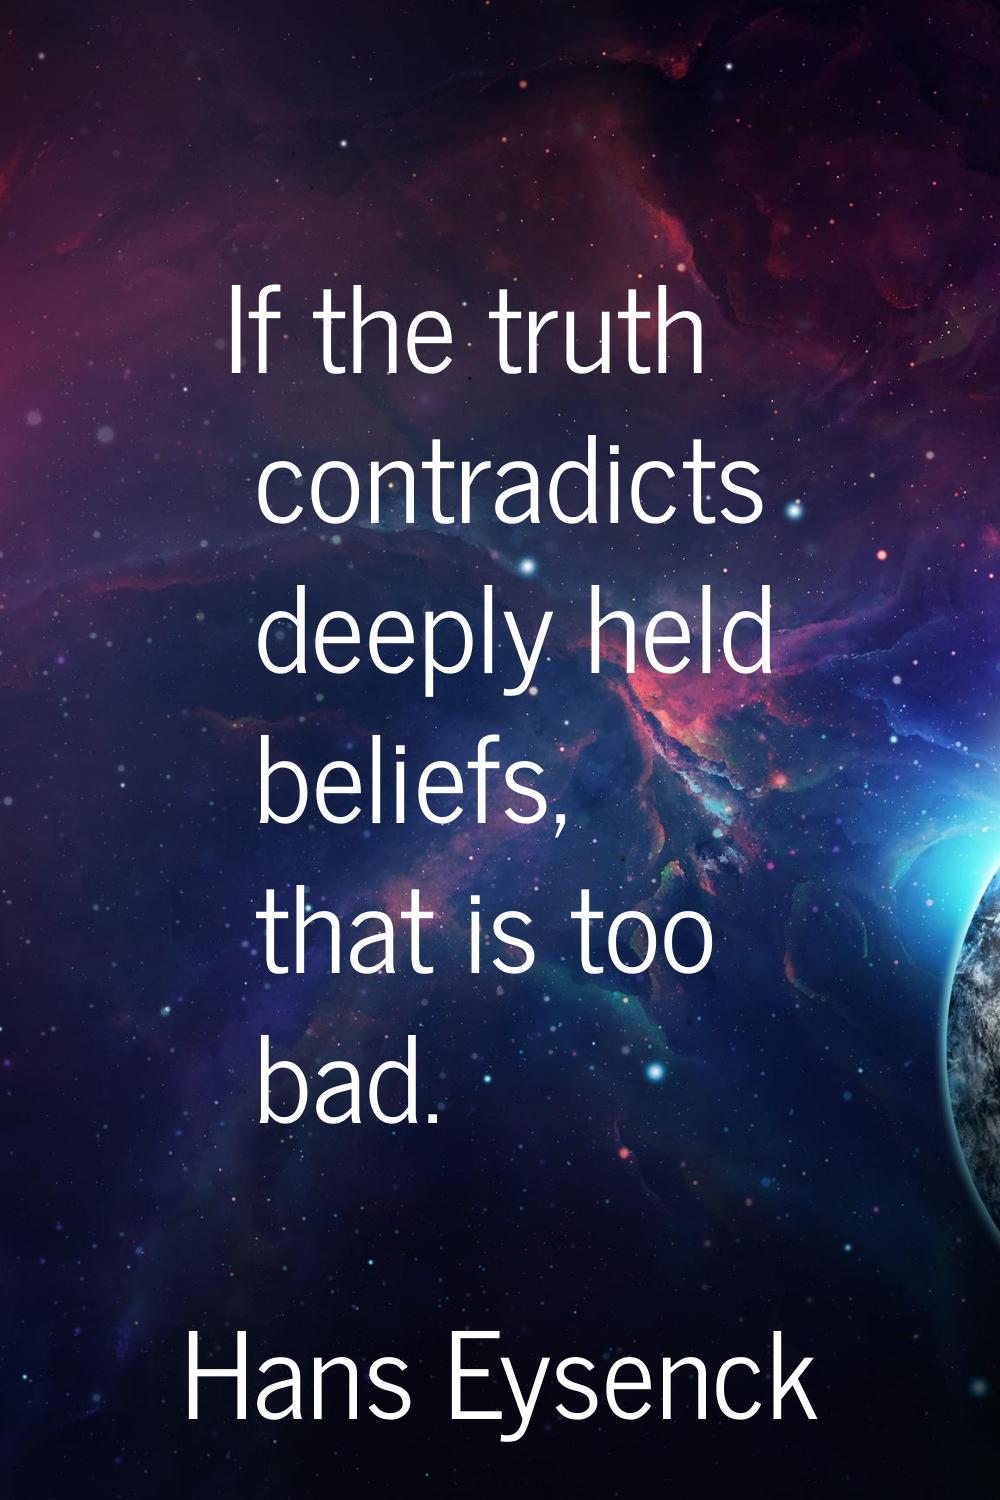 If the truth contradicts deeply held beliefs, that is too bad.